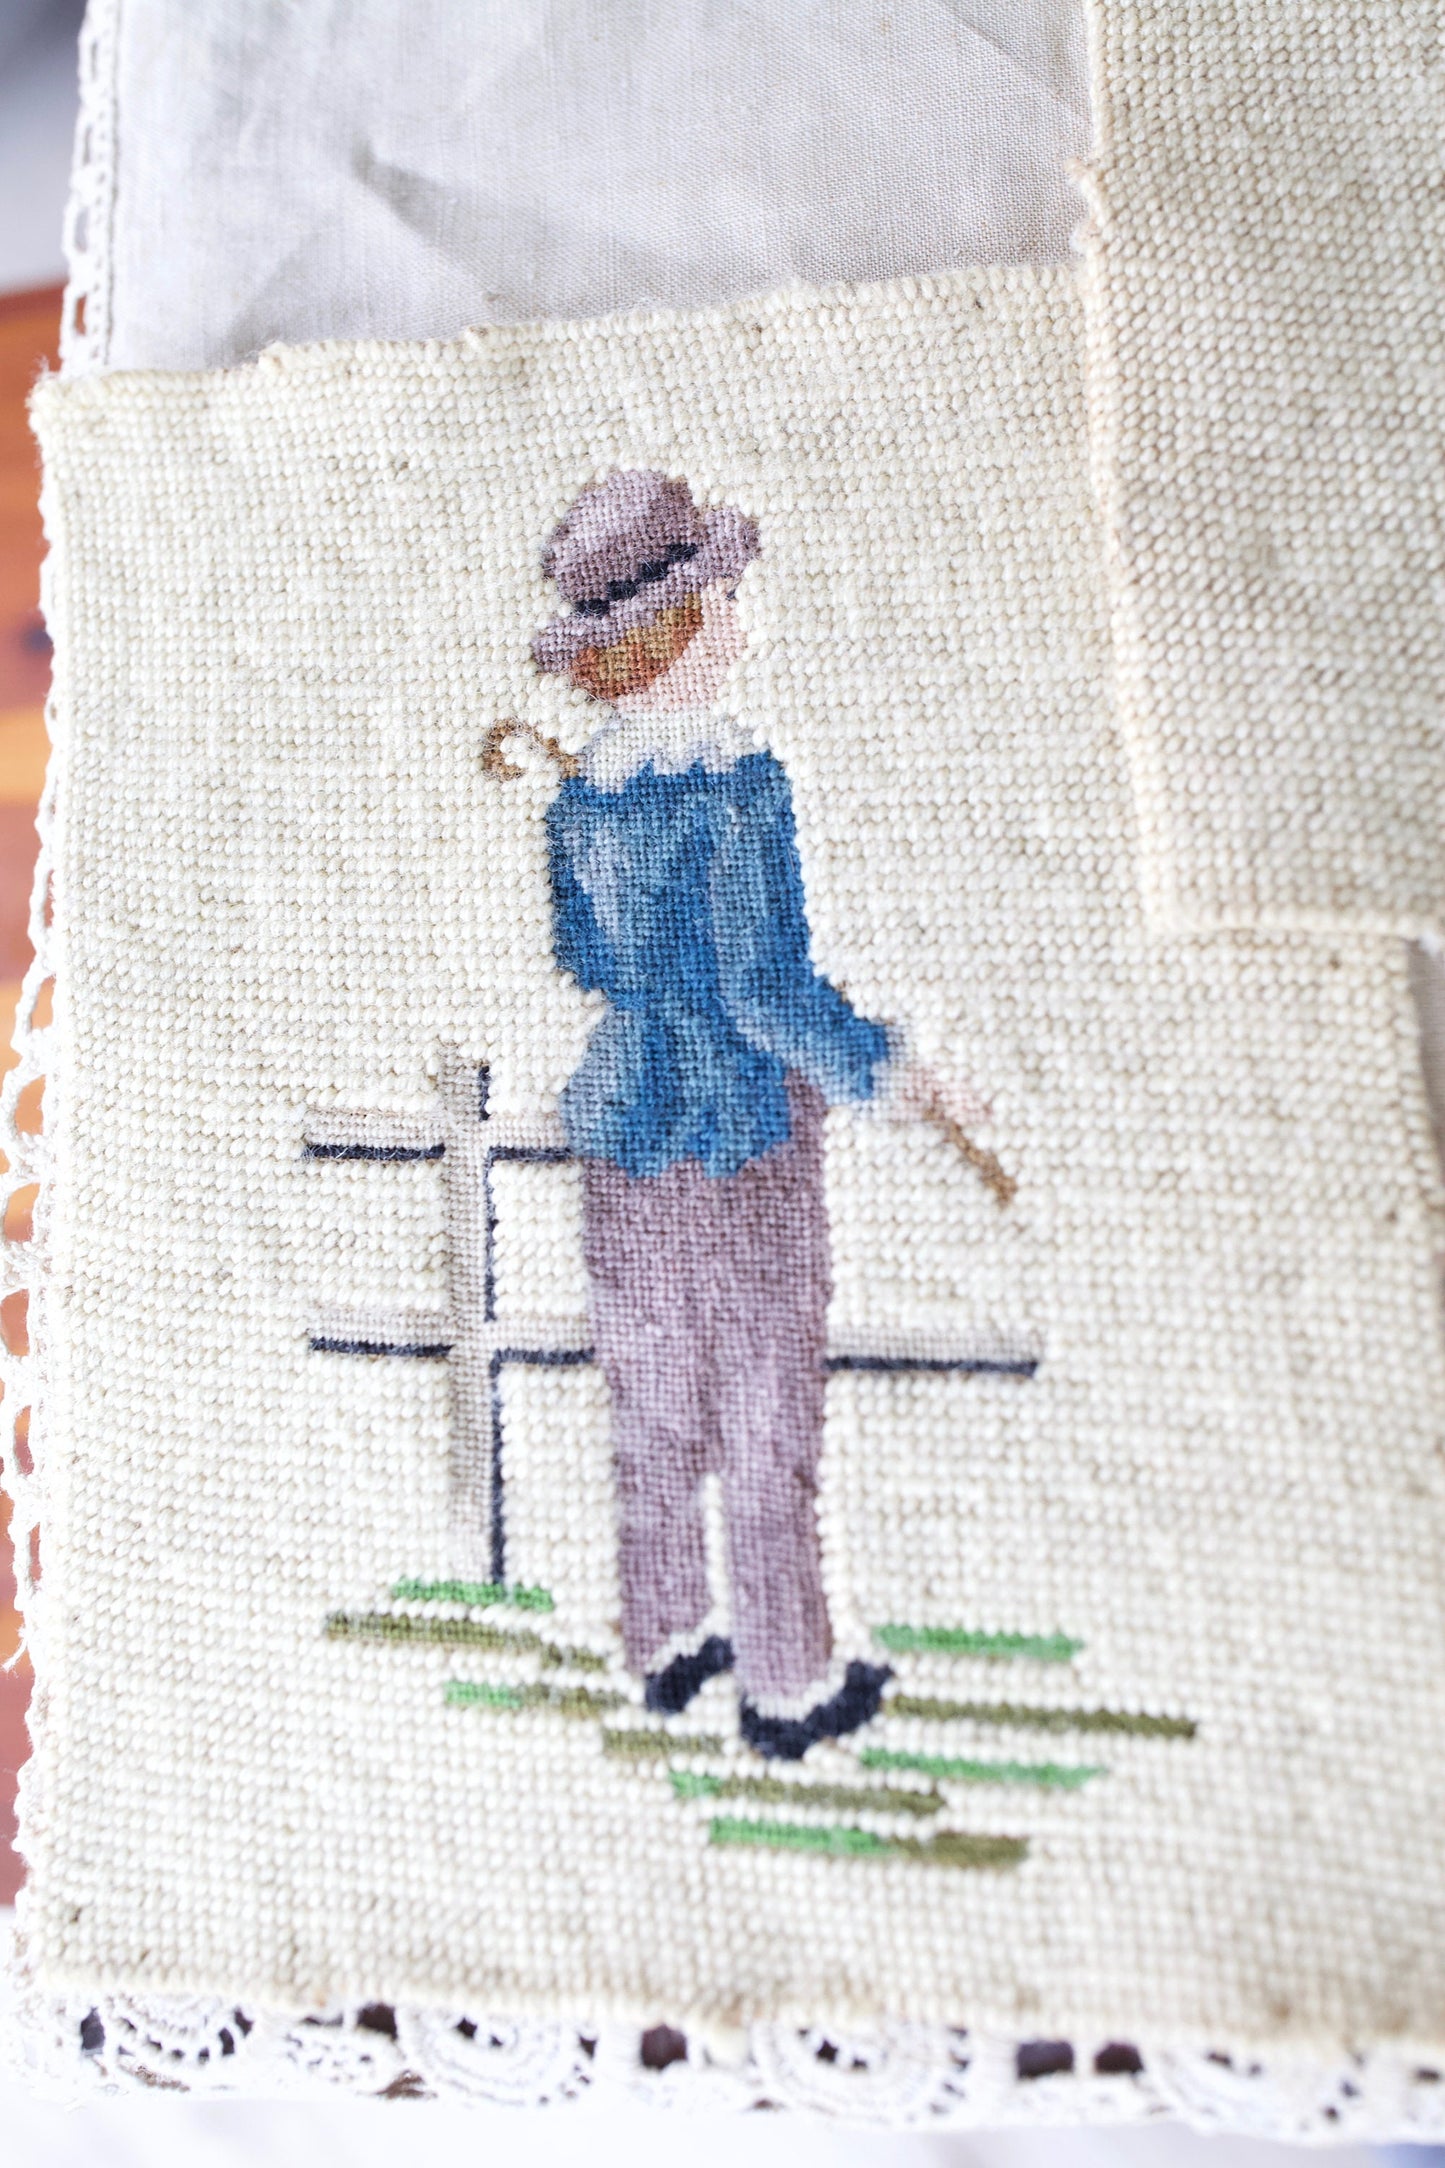 Vintage Needlepoint Man and Woman 8x10"